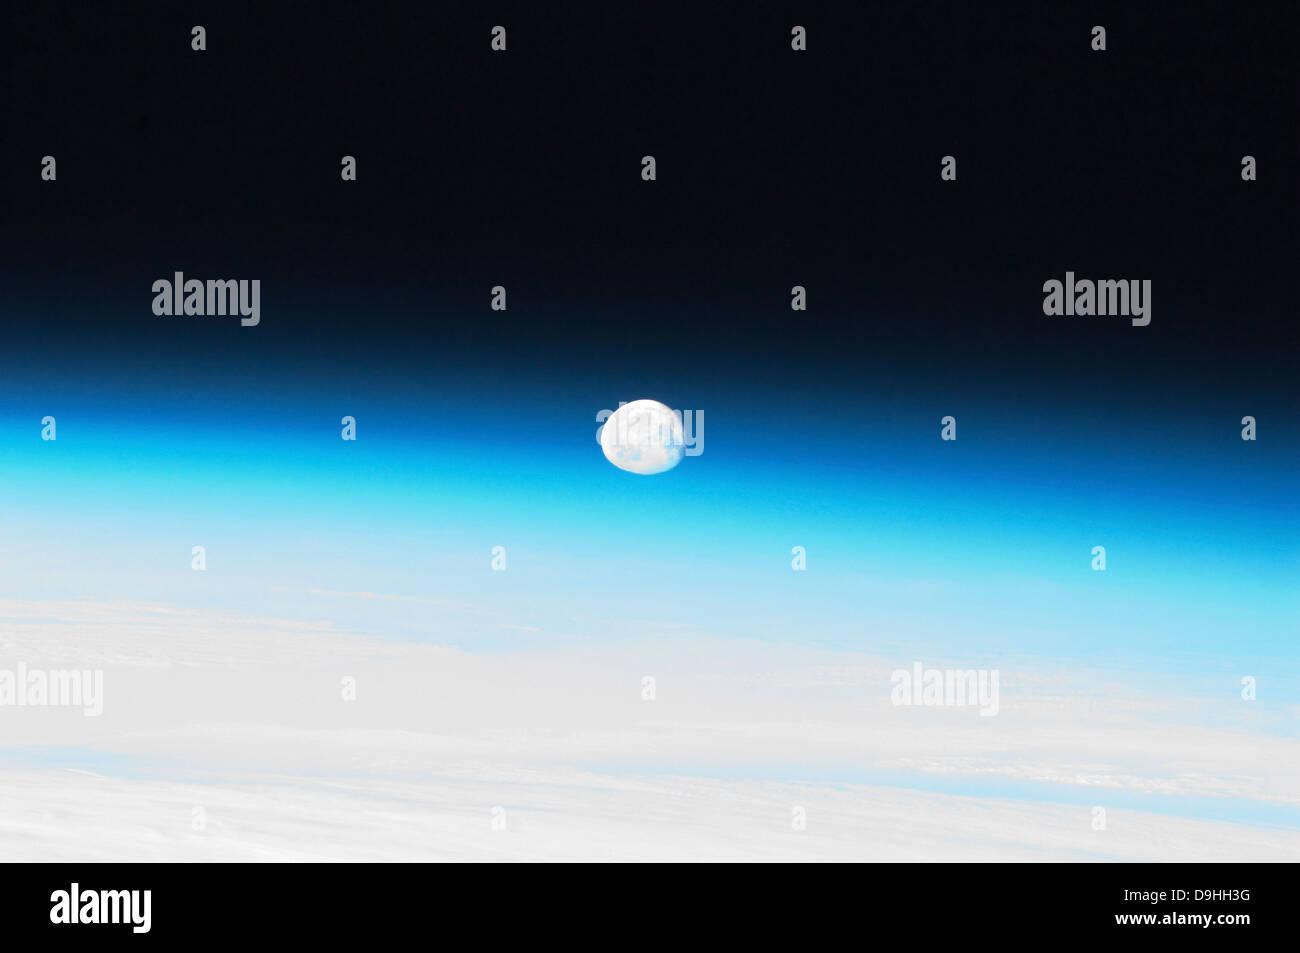 The moon and Earth's atmosphere. Stock Photo